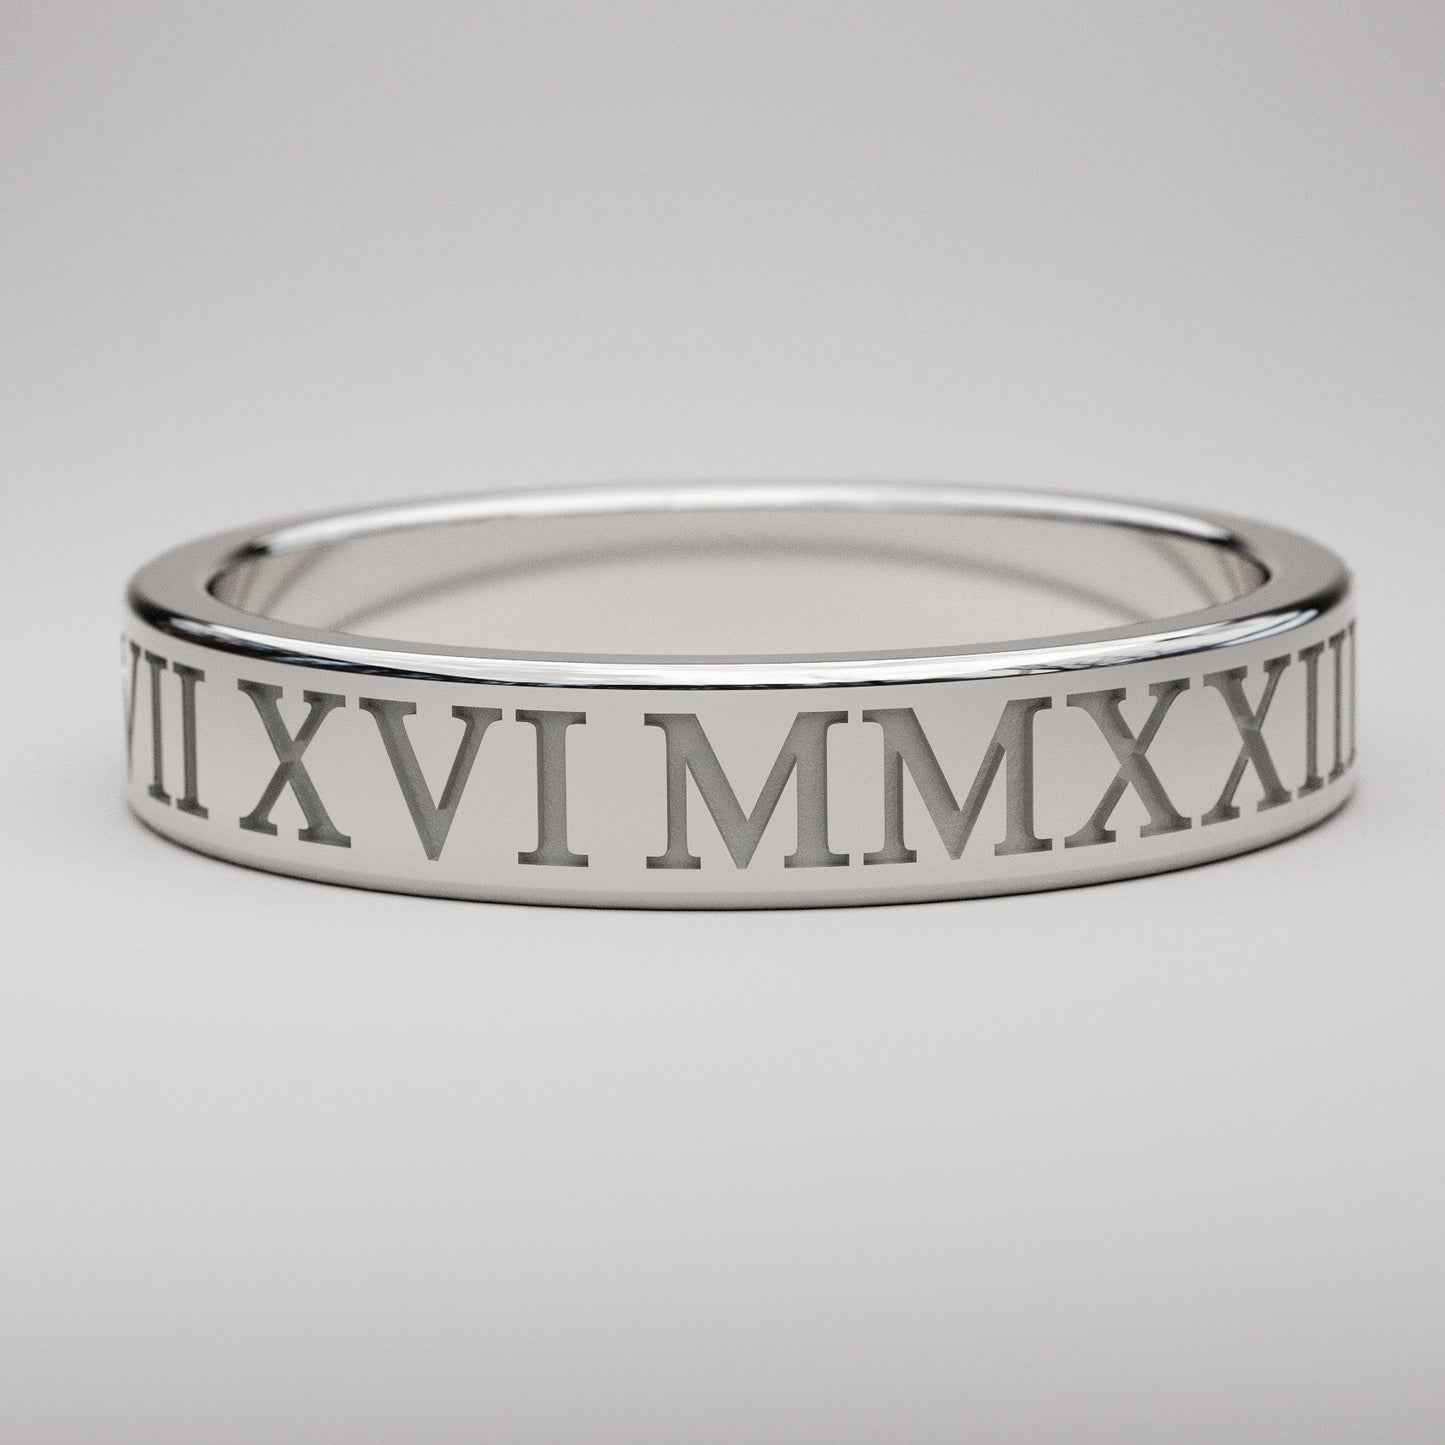 4mm engraved style custom Roman Numeral date ring in white gold